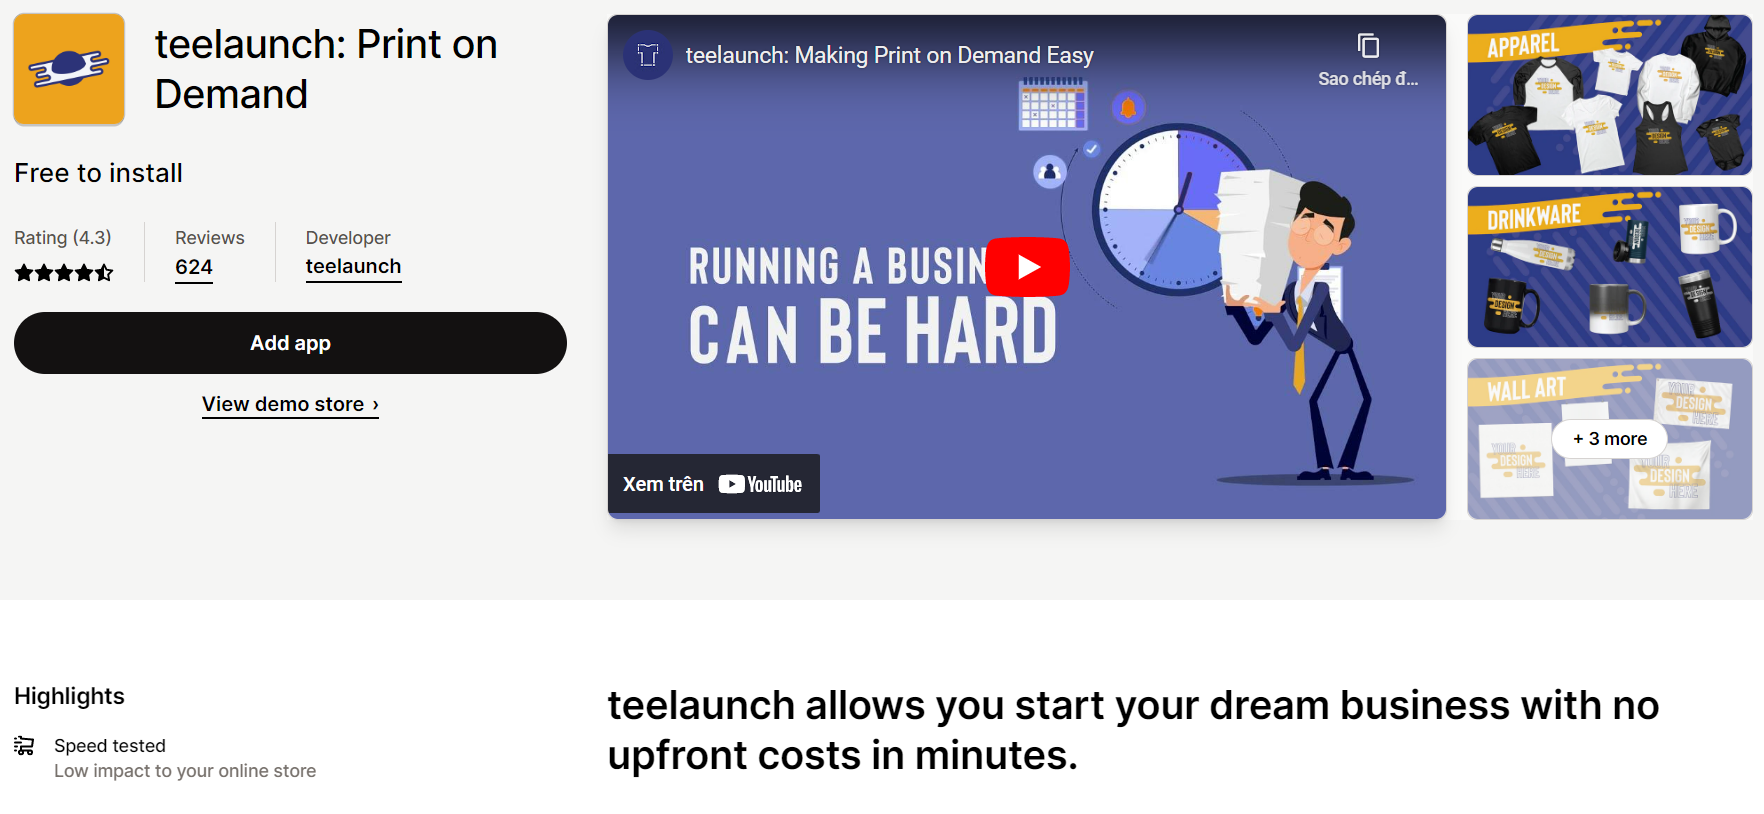 teelaunch: best print on demand apps for shopify